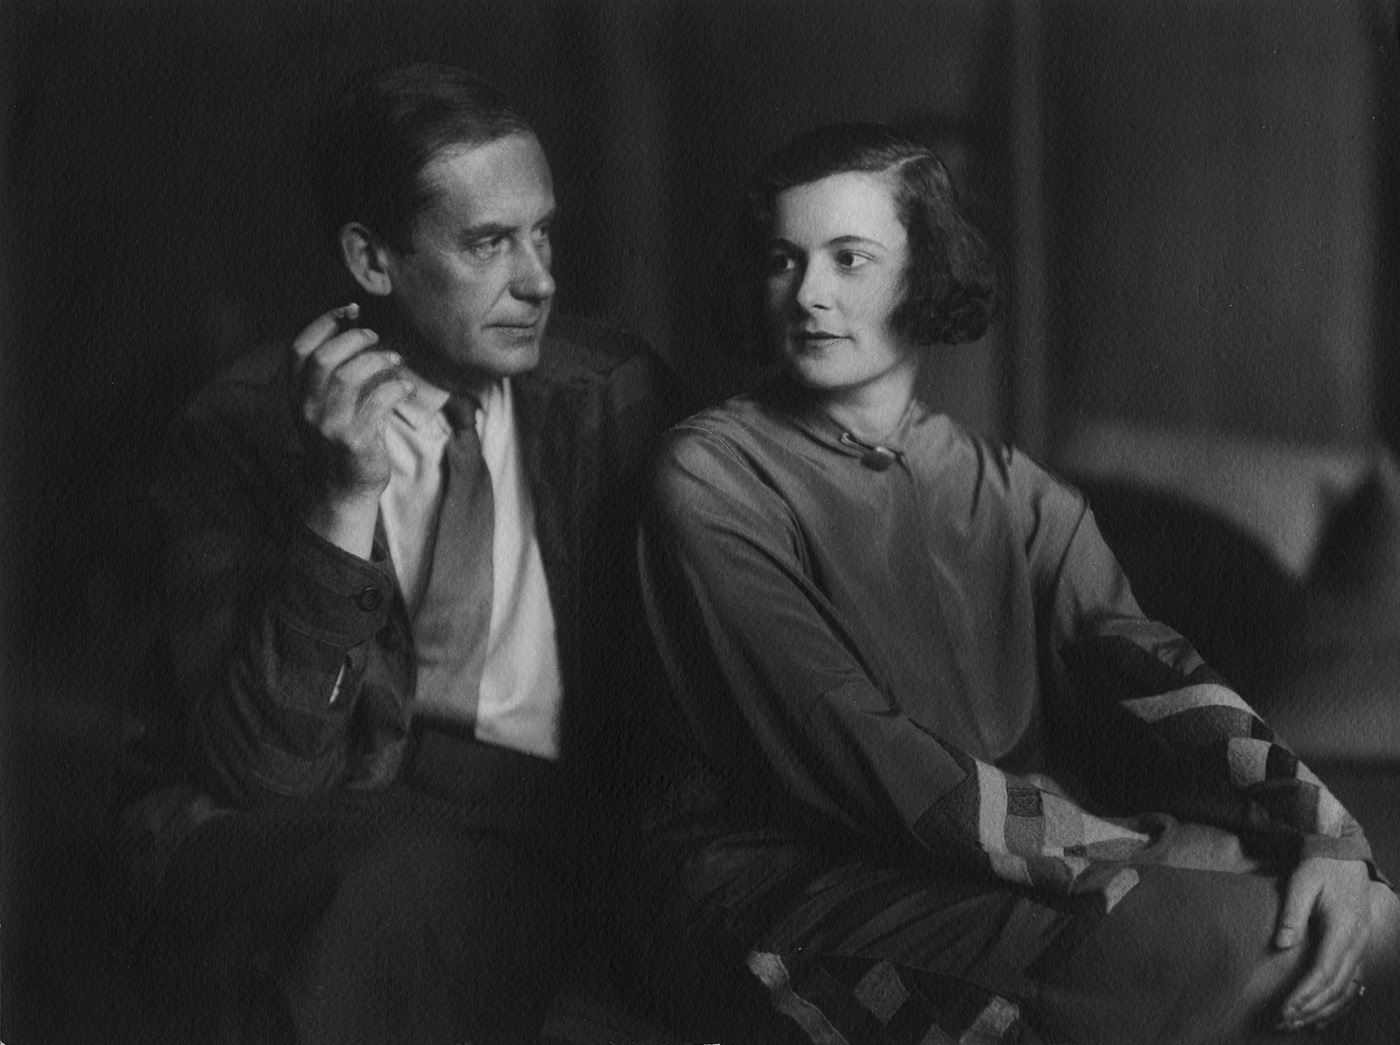 Photo of a man and woman in black and white, Walter Gropius and wife